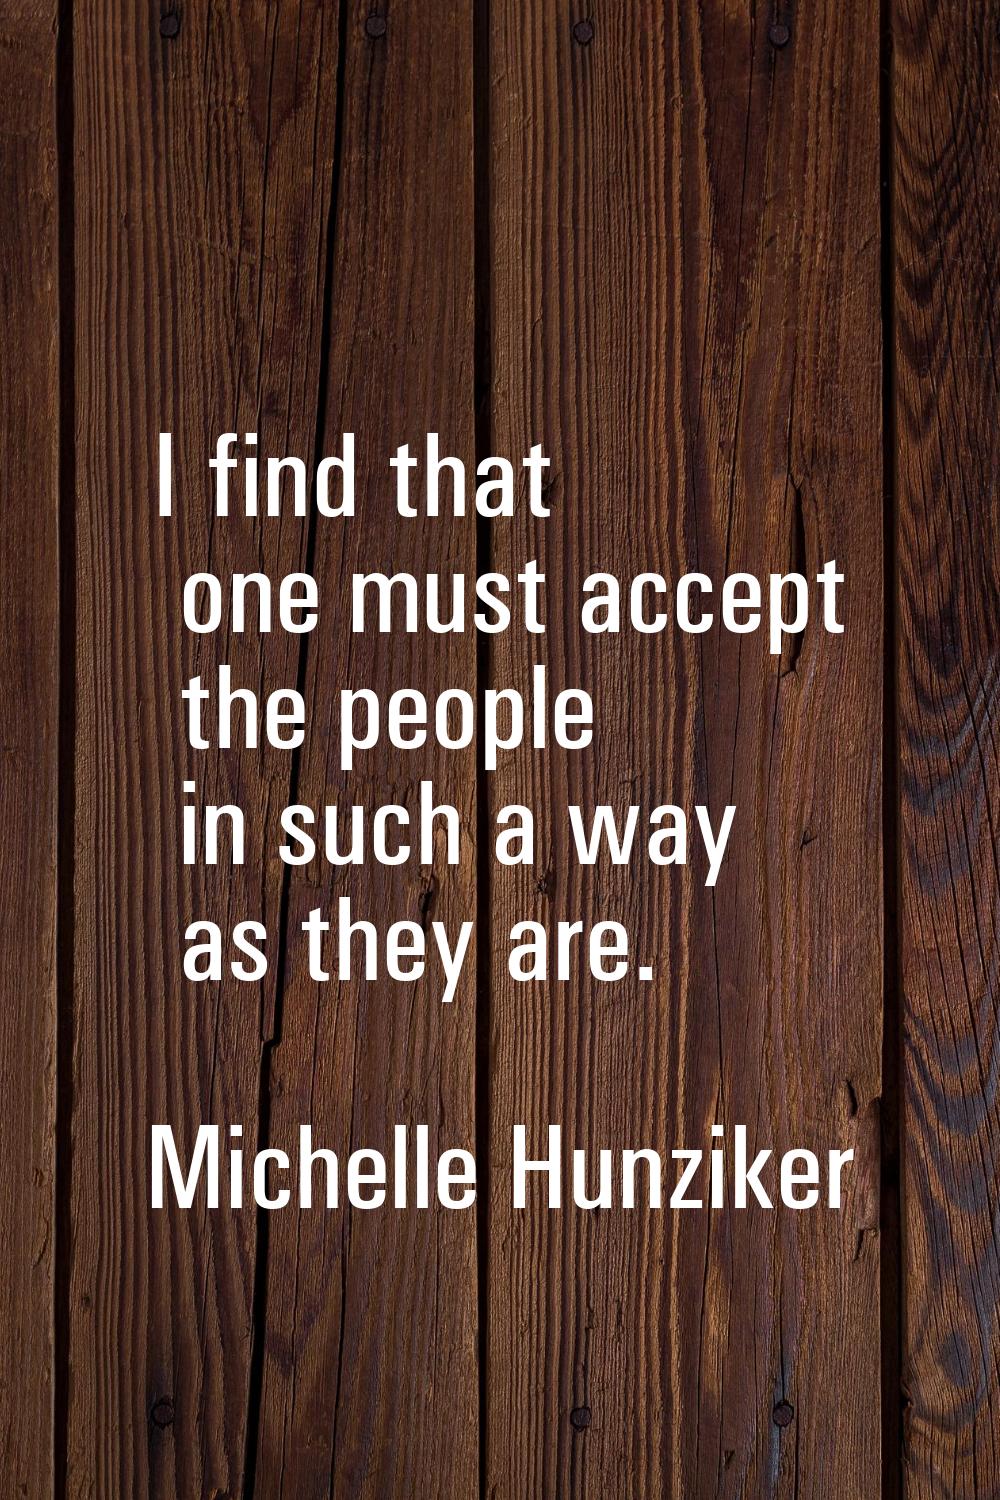 I find that one must accept the people in such a way as they are.